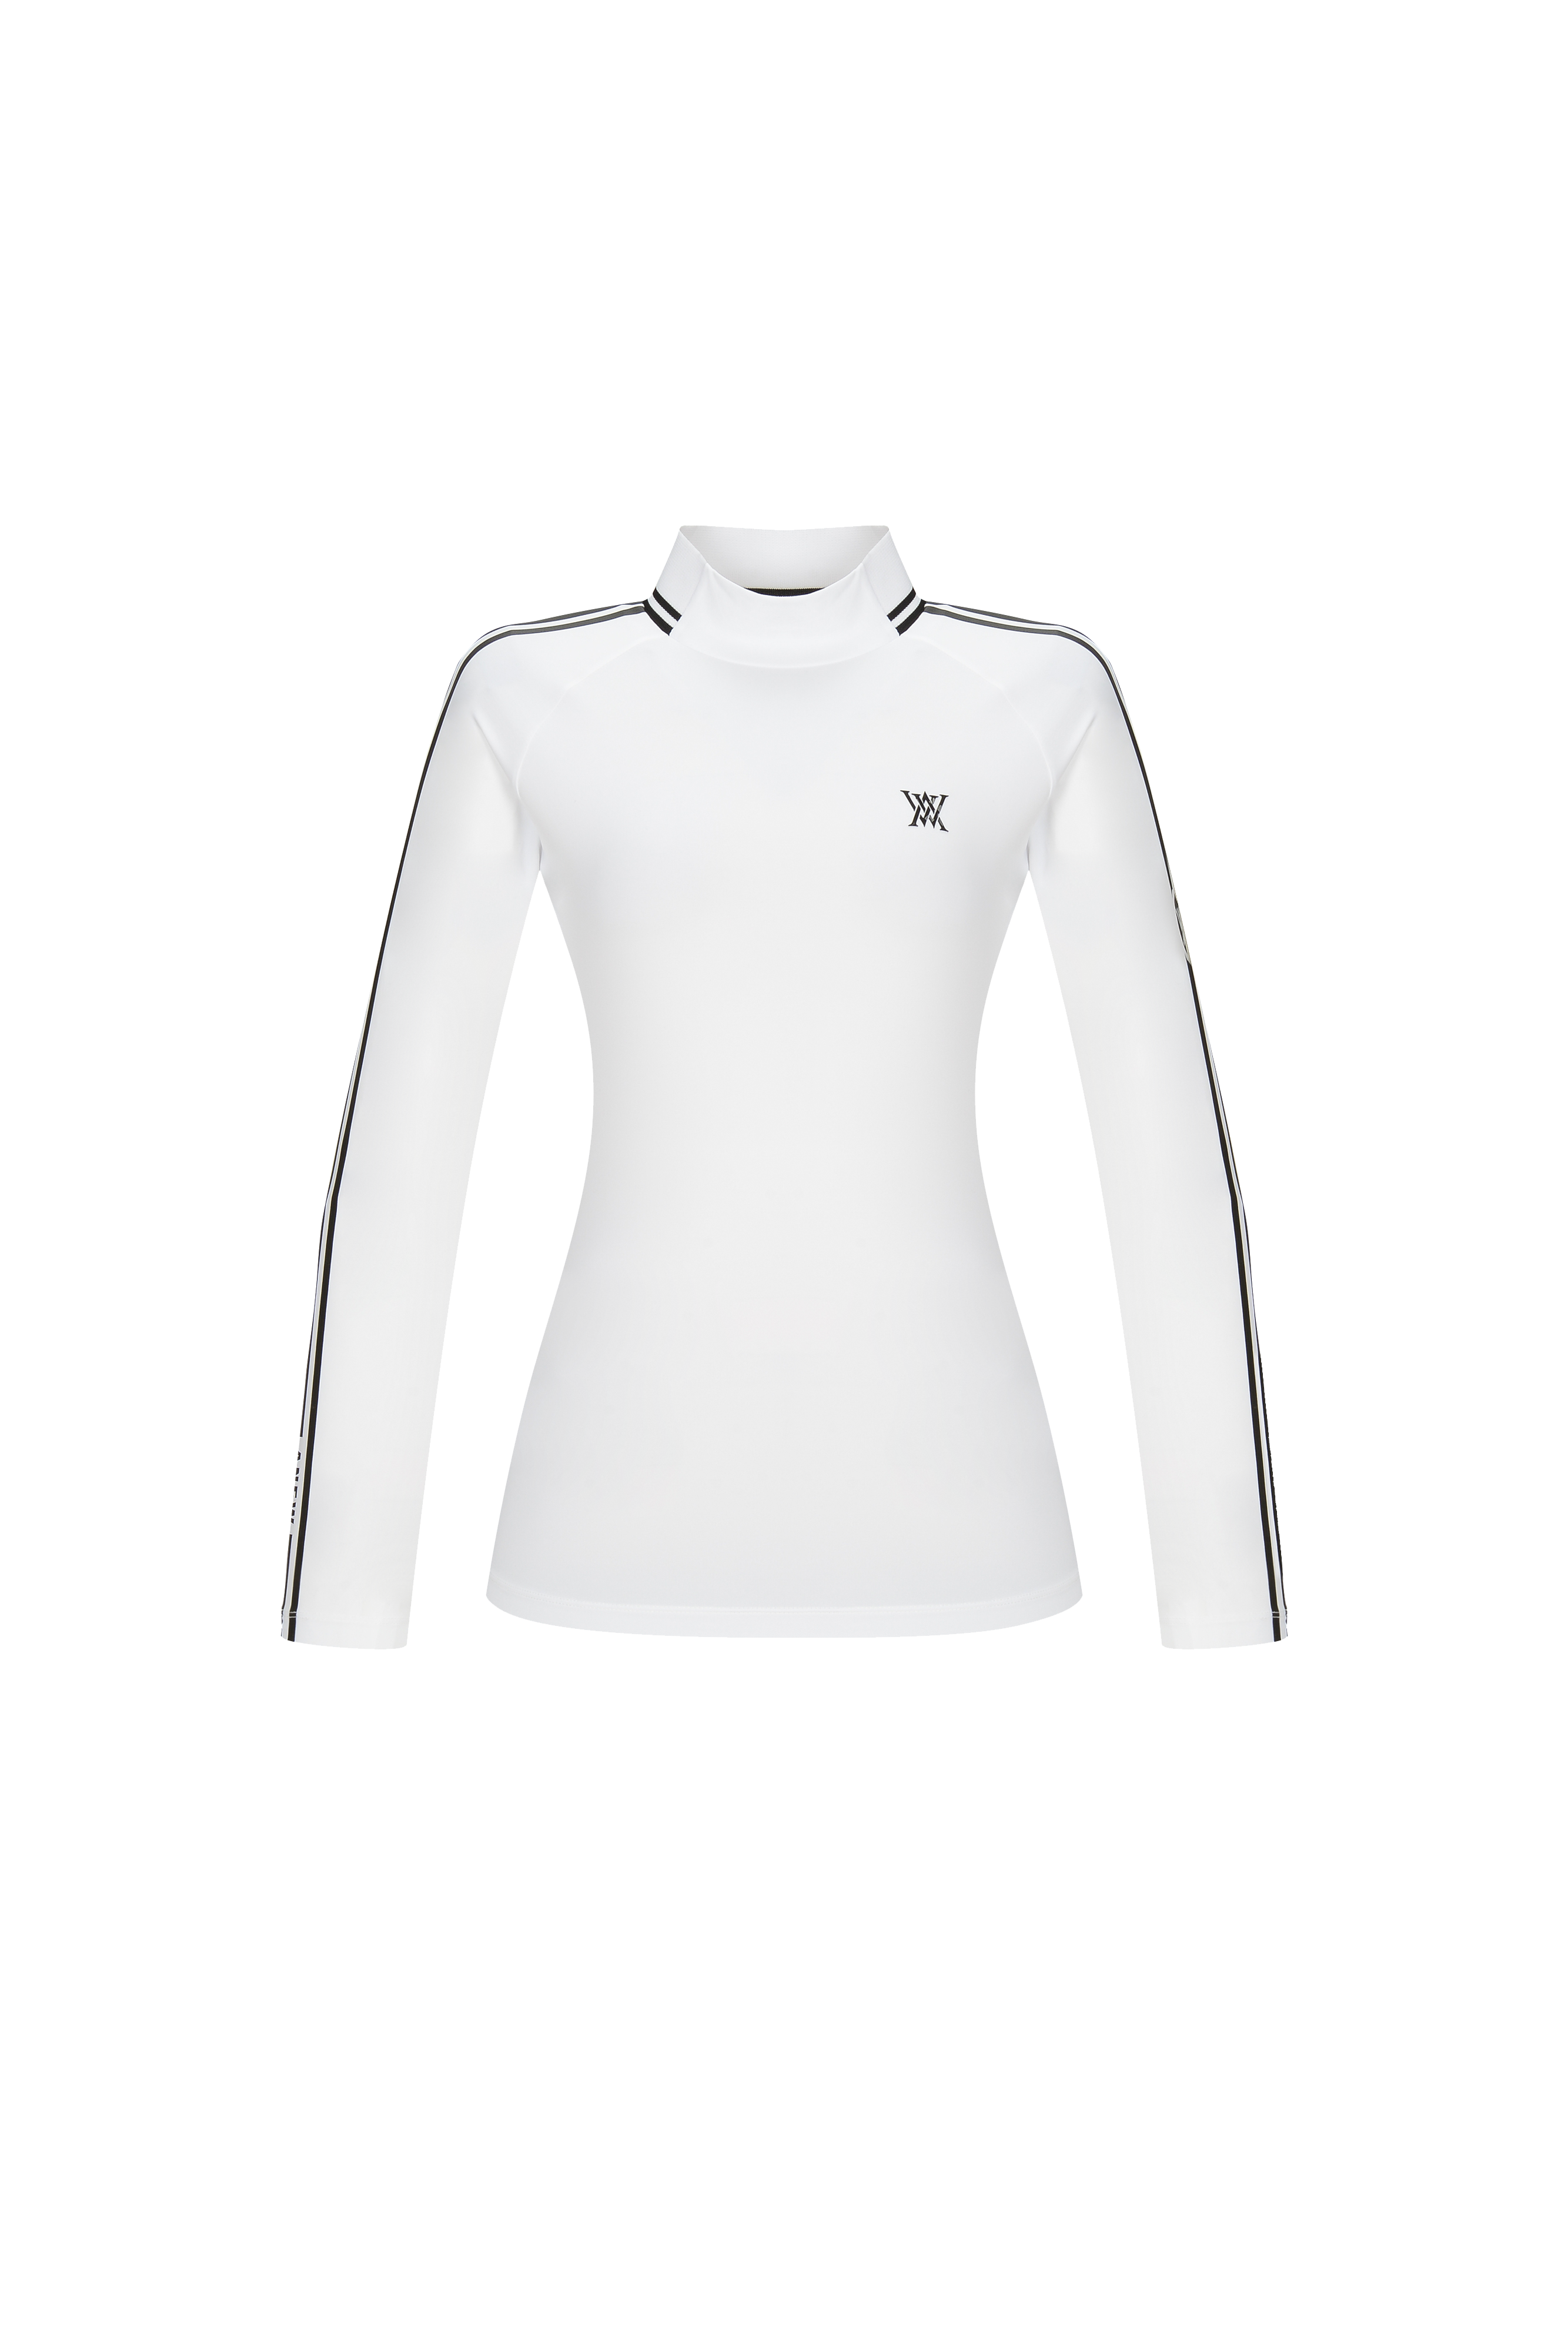 ANEW GOLF Women's Printed Sleeves Neck